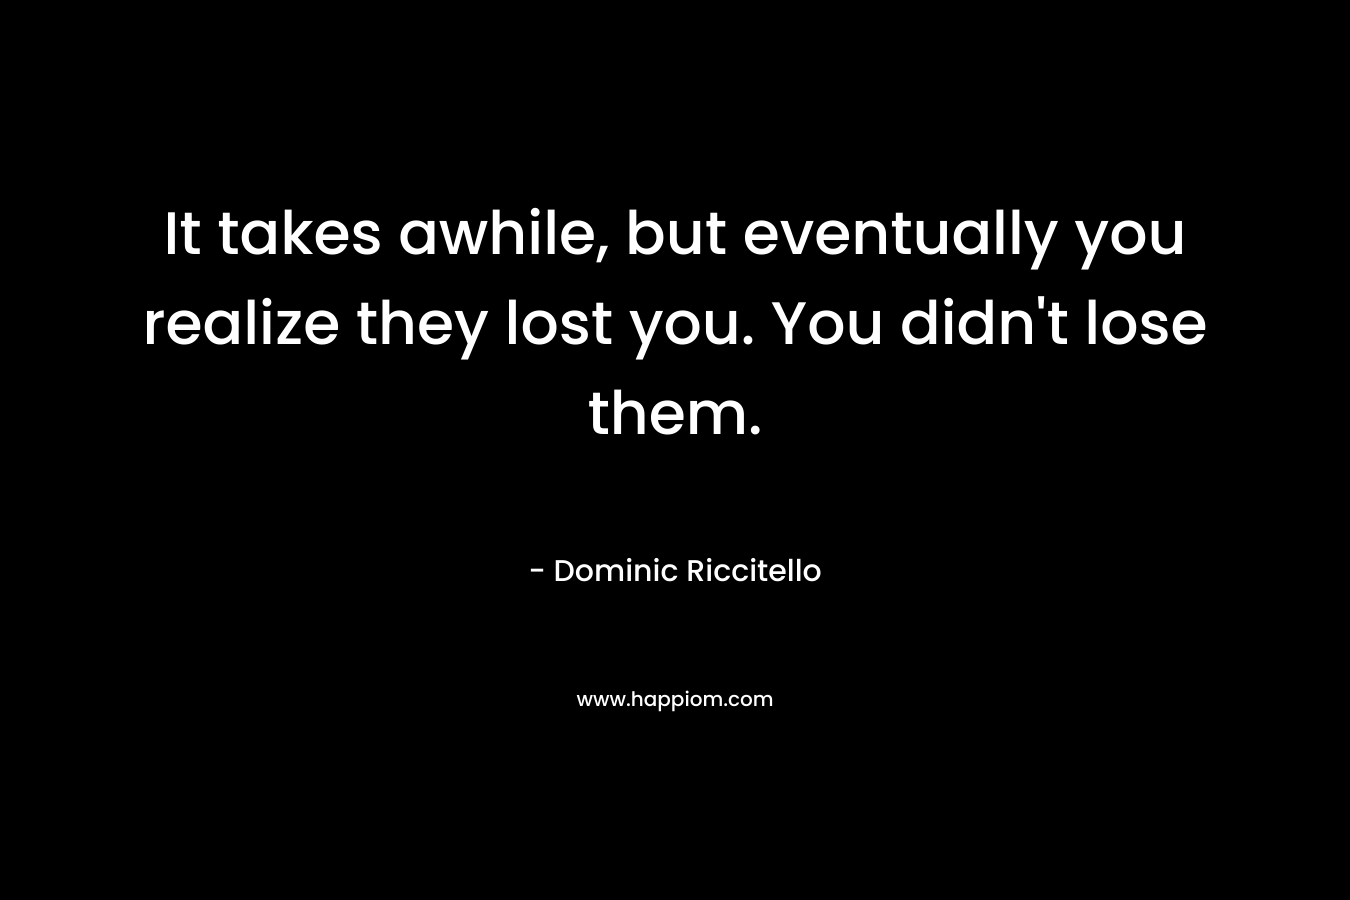 It takes awhile, but eventually you realize they lost you. You didn't lose them.